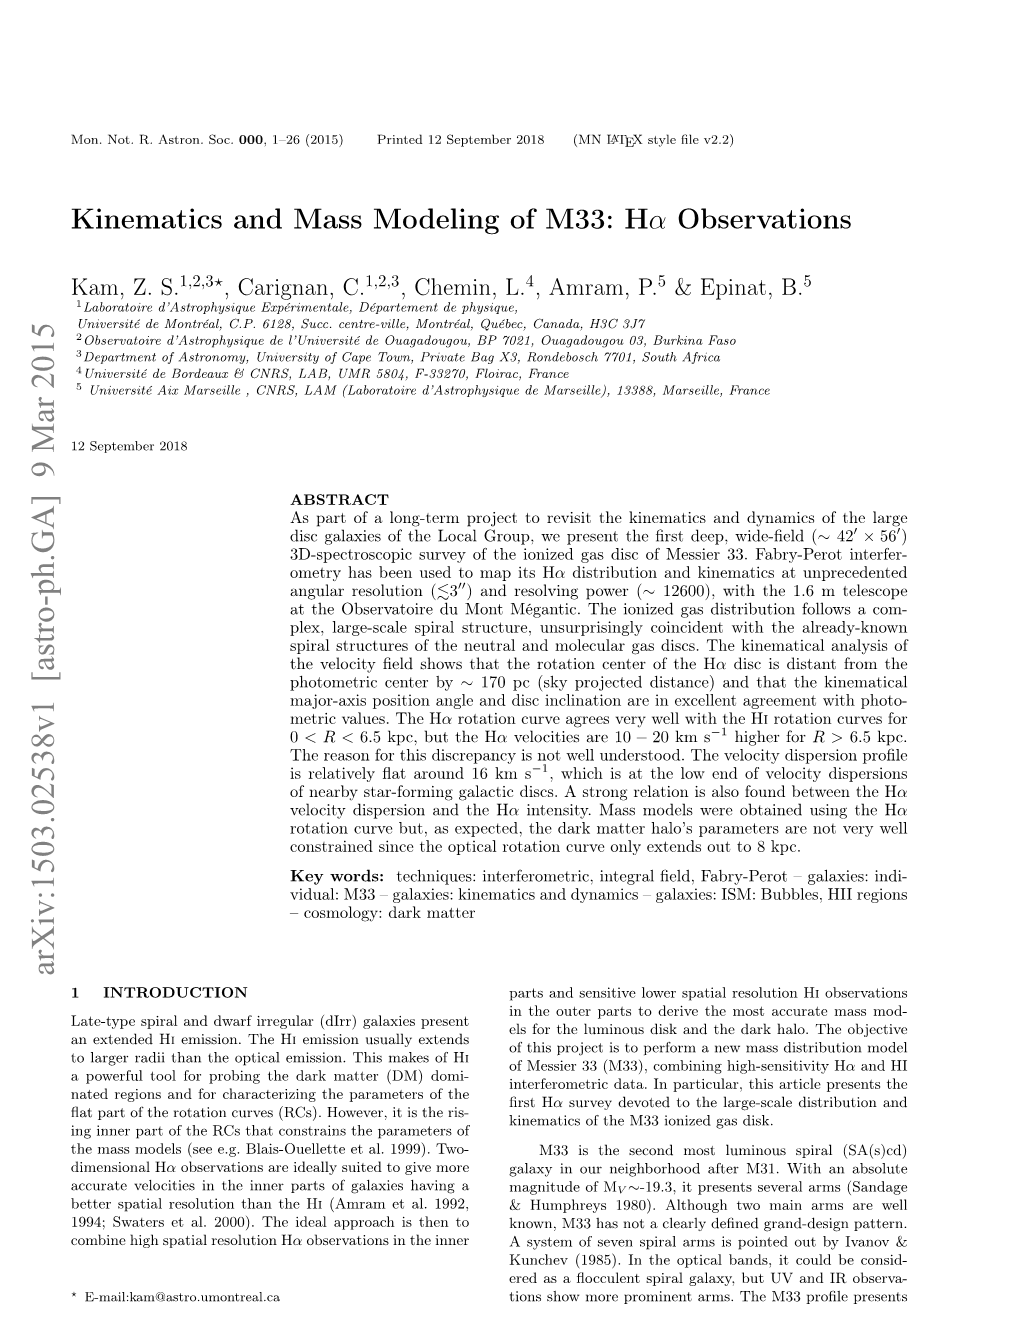 Kinematics and Mass Modeling of Messier 33: Halpha Observations